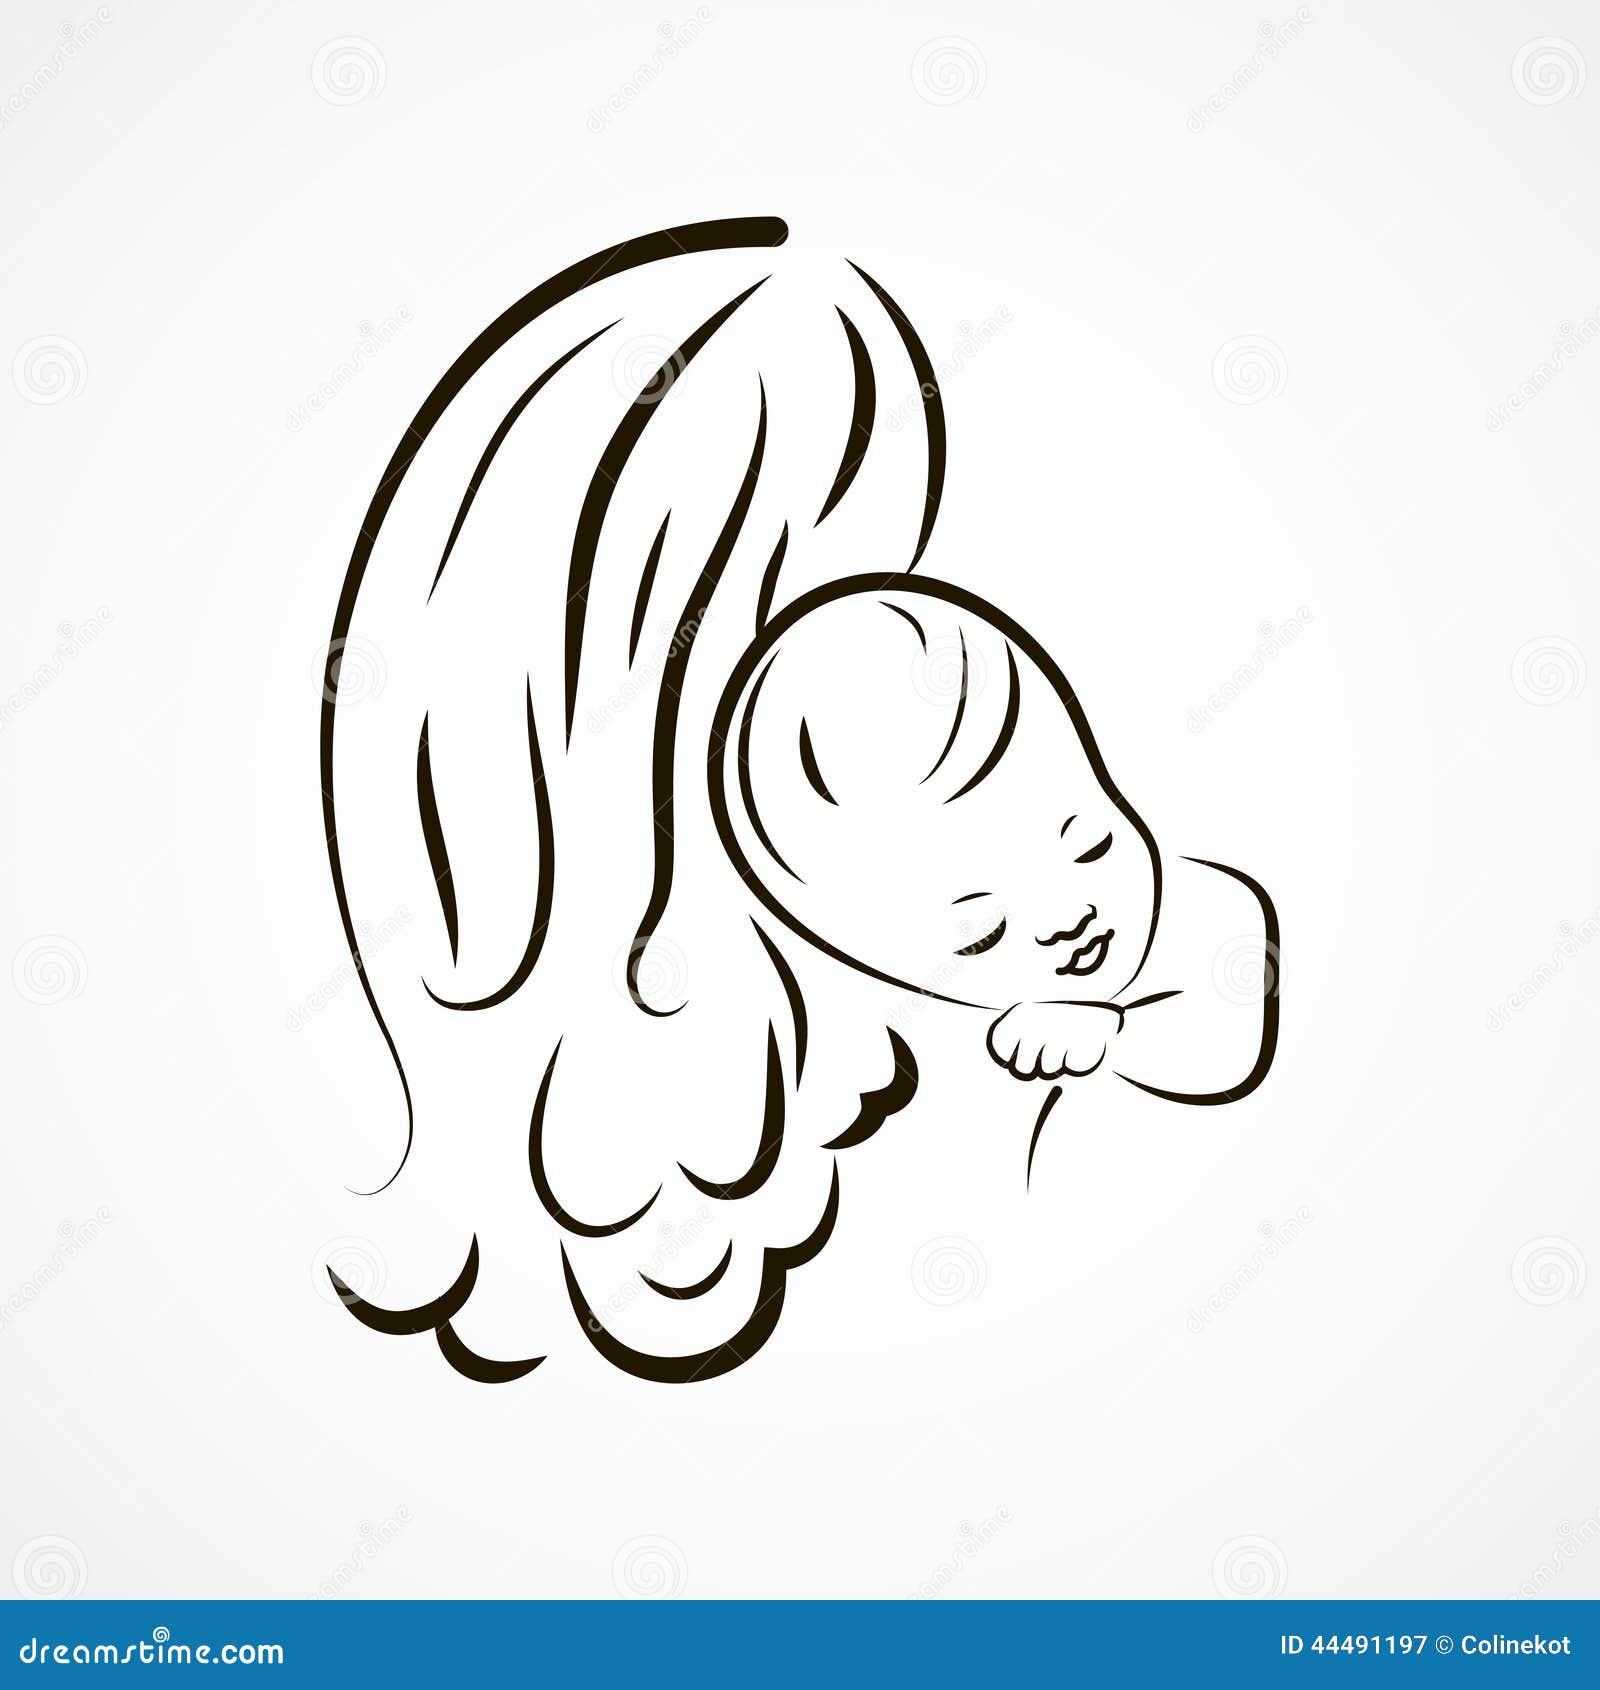 How to Draw a Baby for Kids  Easy Drawing Tutorial